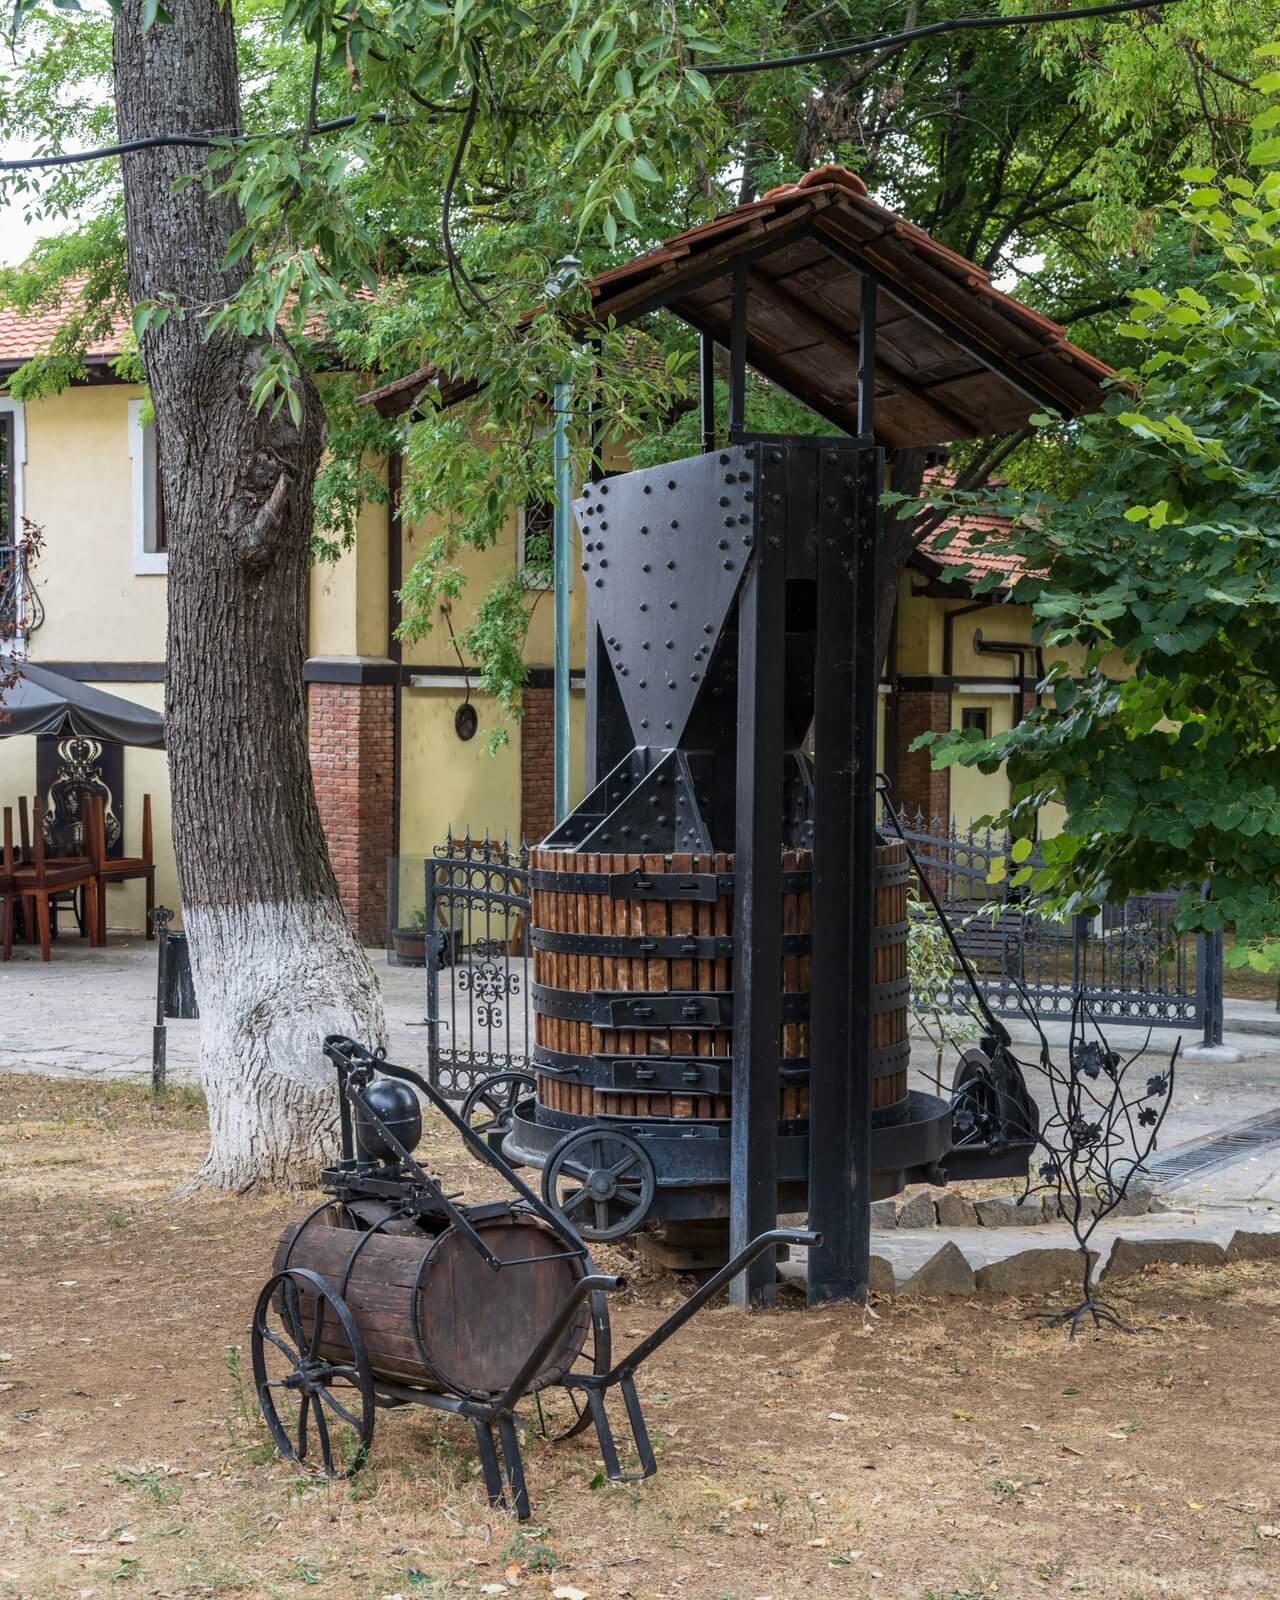 Image of Royal winery (Queen Maria) by Luka Esenko